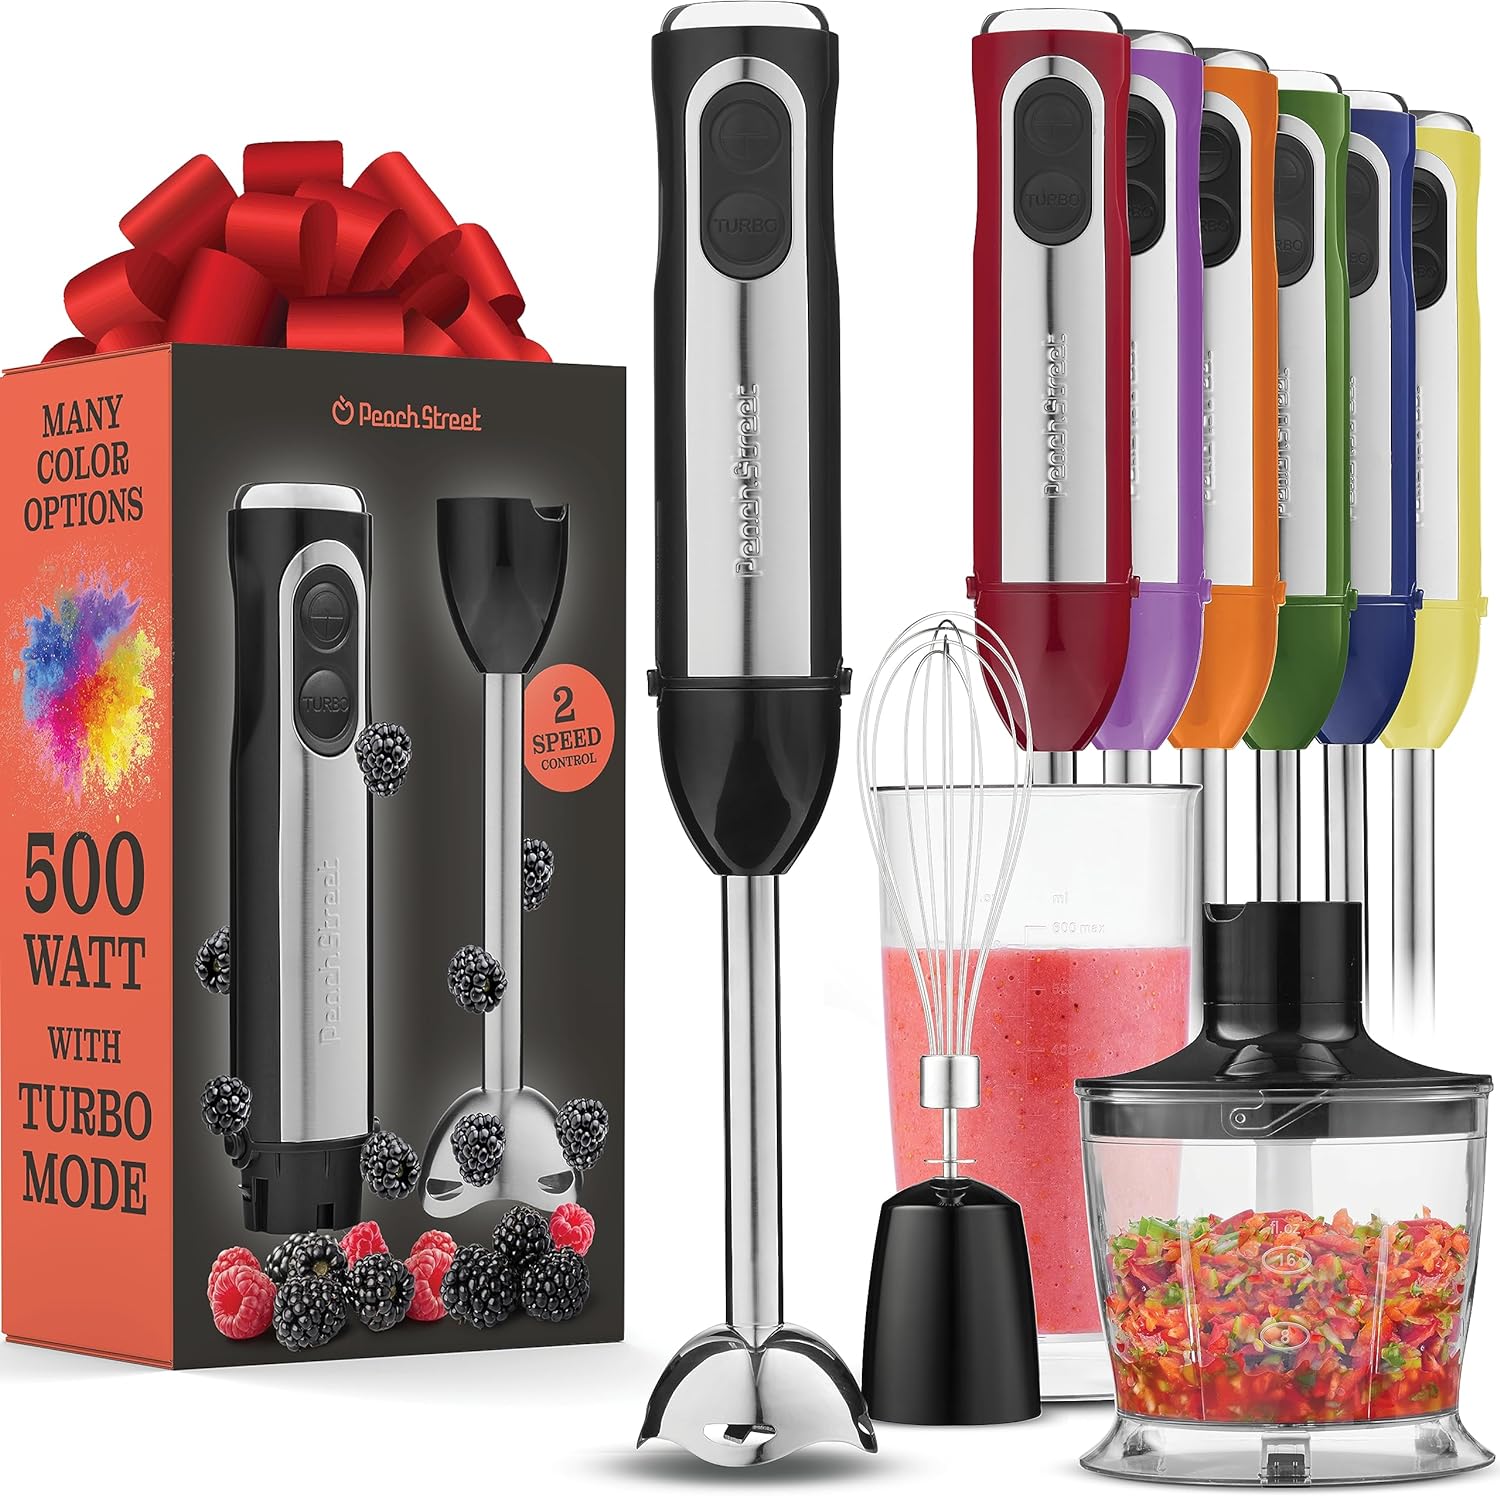 Multi-Use Immersion Blender Review